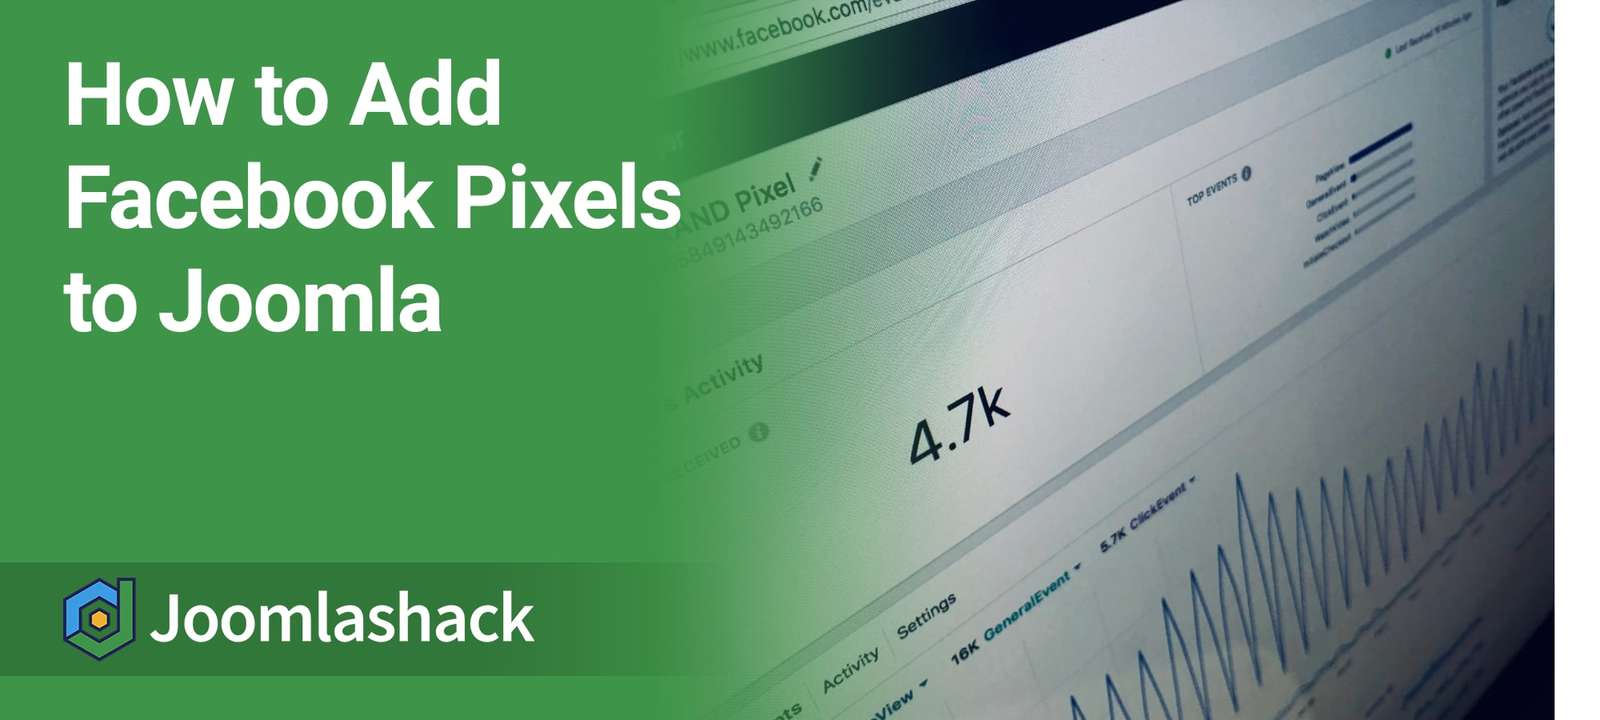 Connect Facebook Pixel to a Joomla Site with Shack Analytics